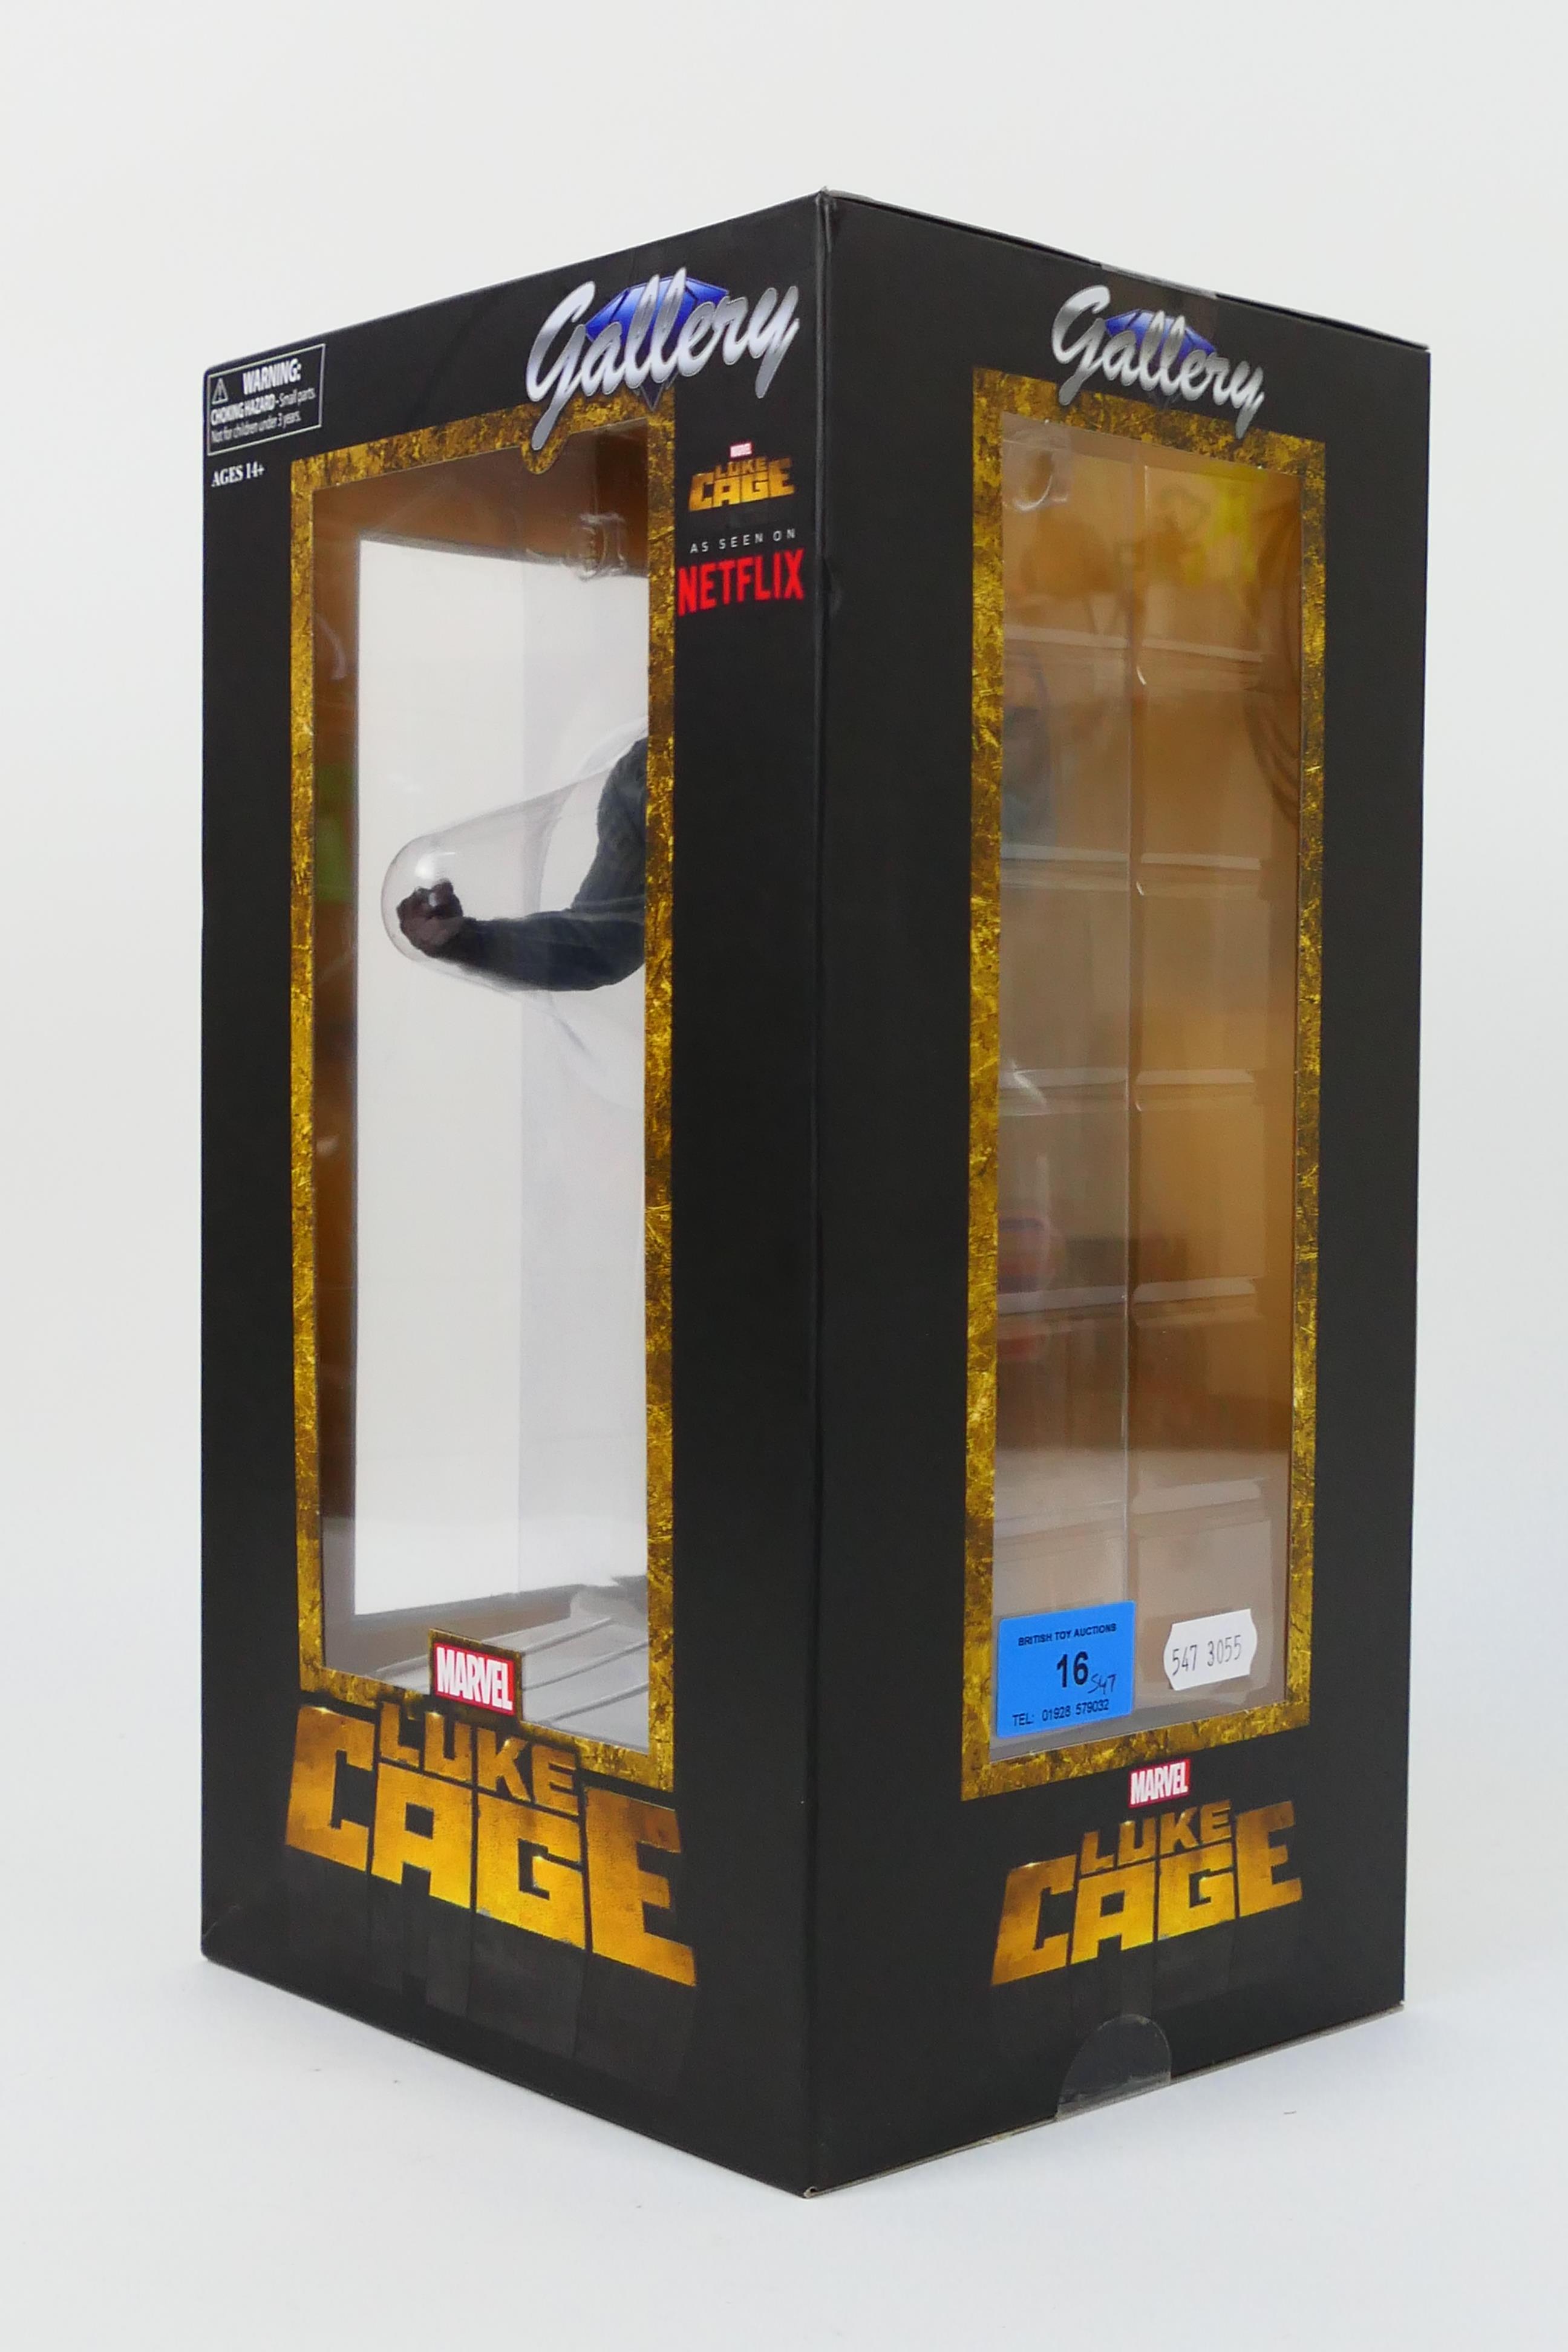 Diamond Select Toys - Marvel - A factory sealed 11 inch Luke Cage diorama sculpted by Rocco - Image 2 of 3